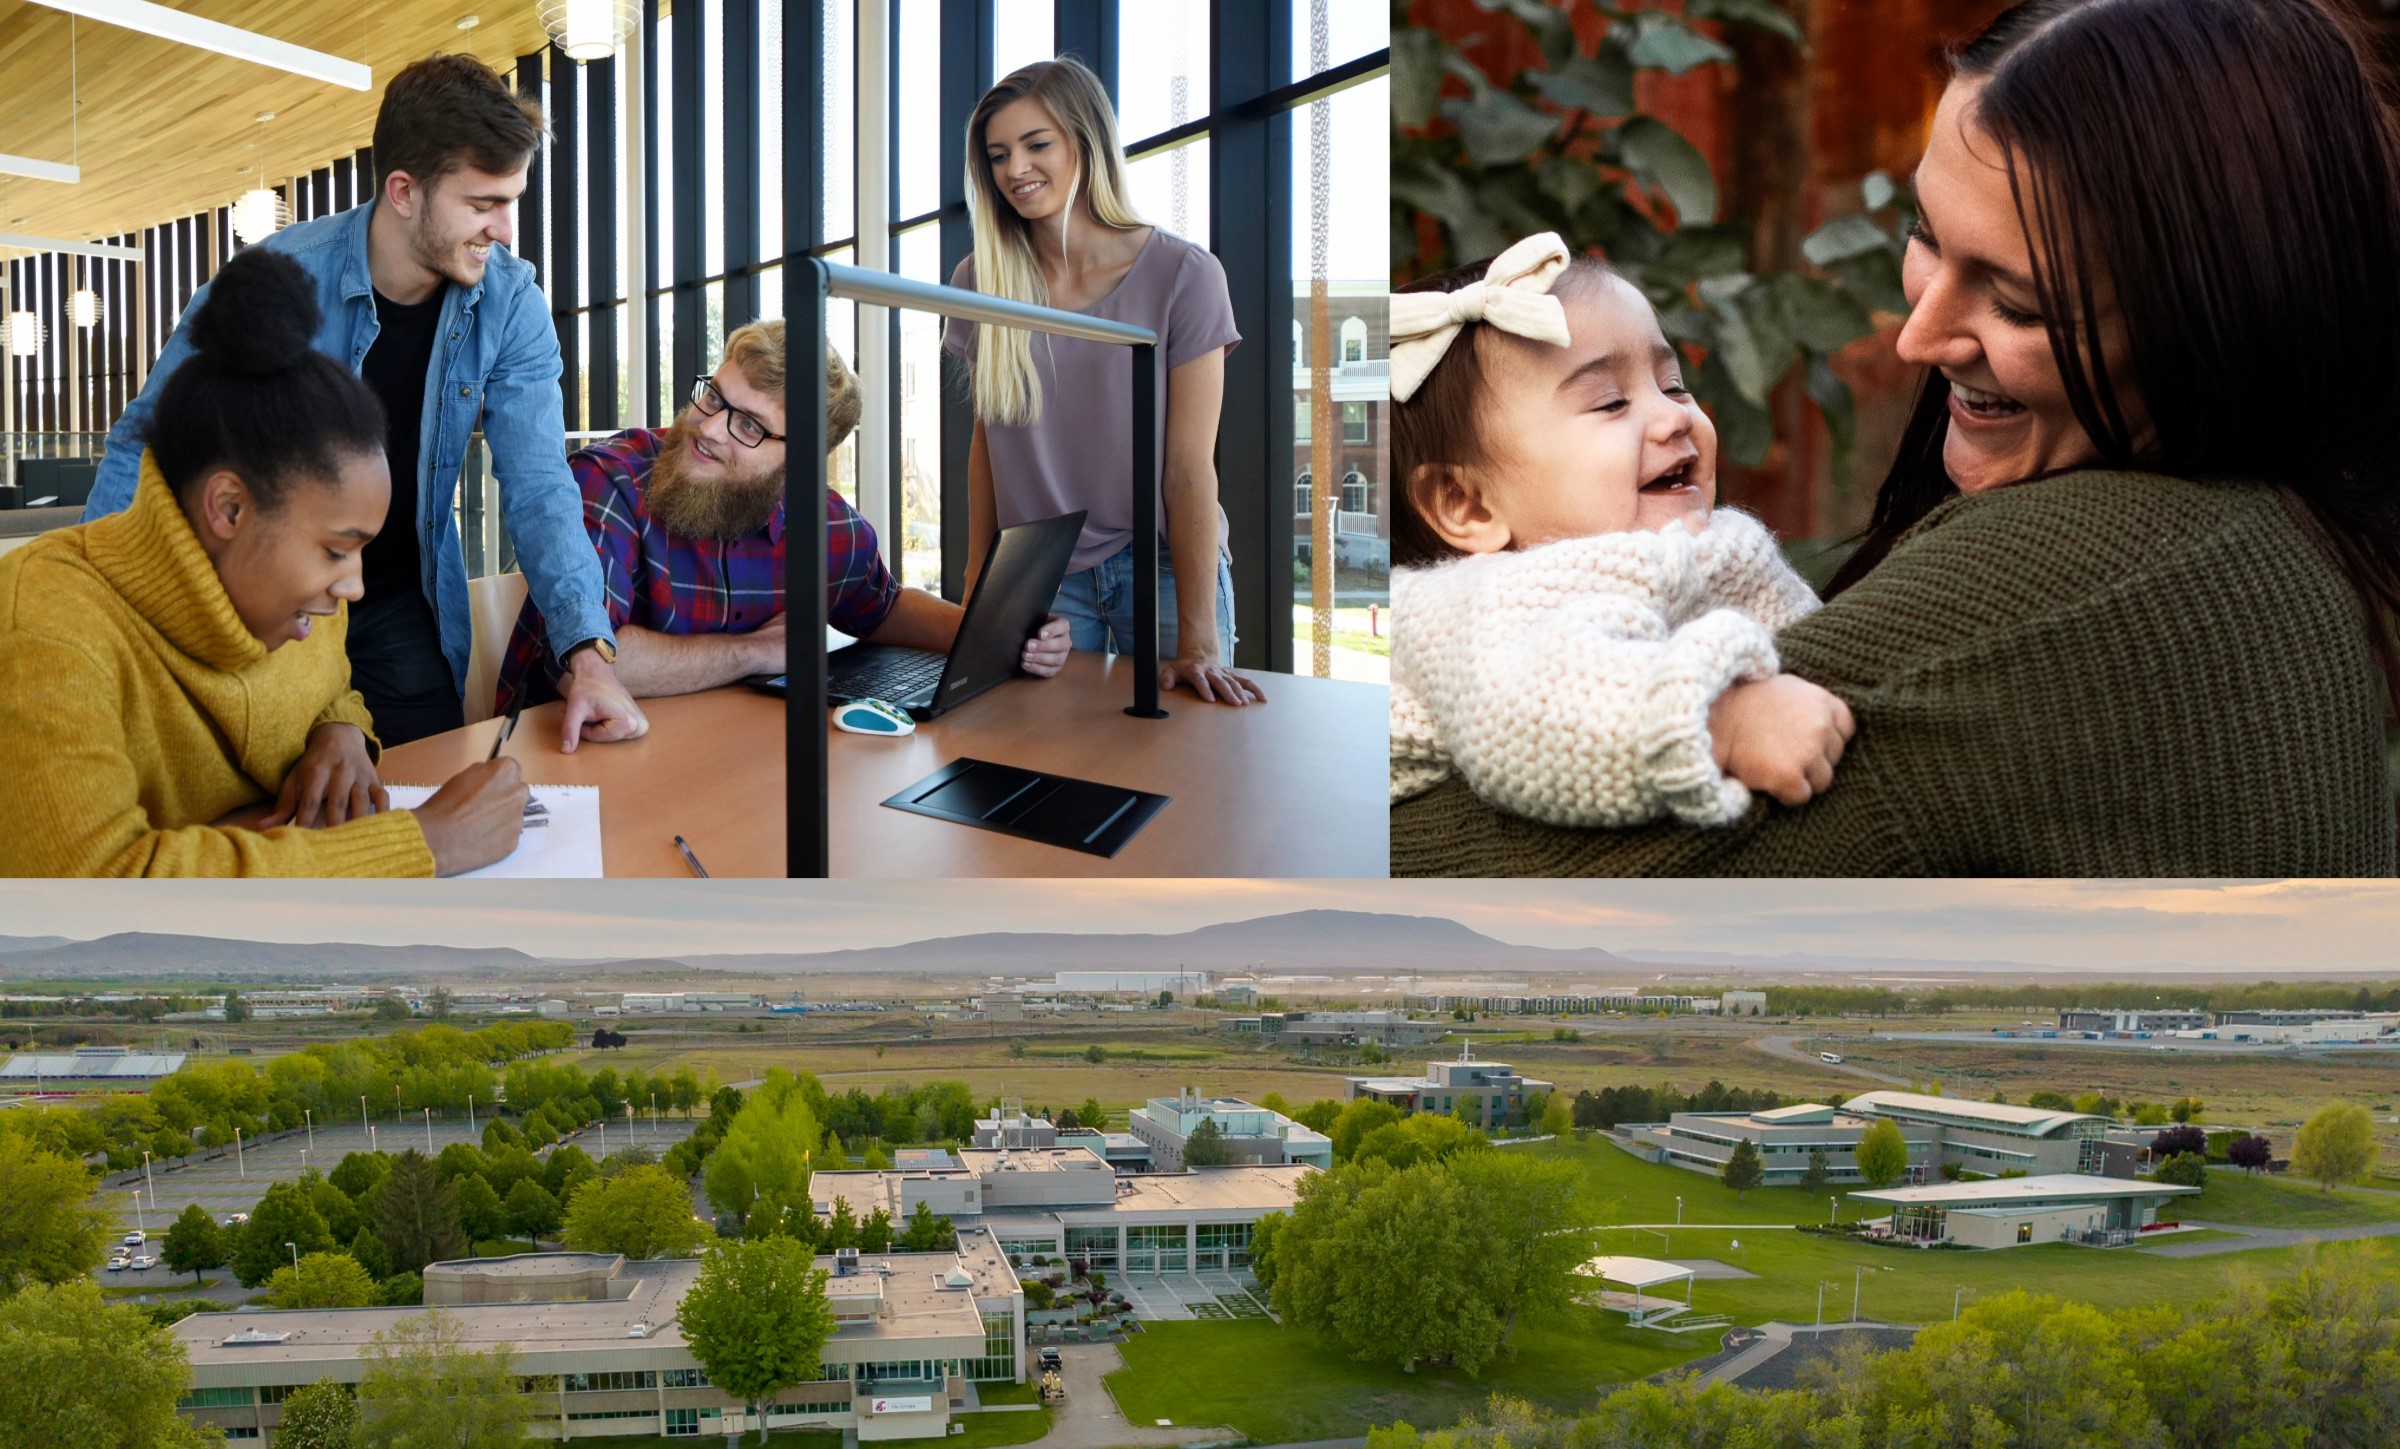 A collage of three photos. The top left is a group of four college students around a library table; the top right is a mother holding her young daughter in her arms and smiling; the bottom is an ariel photo of a college campus